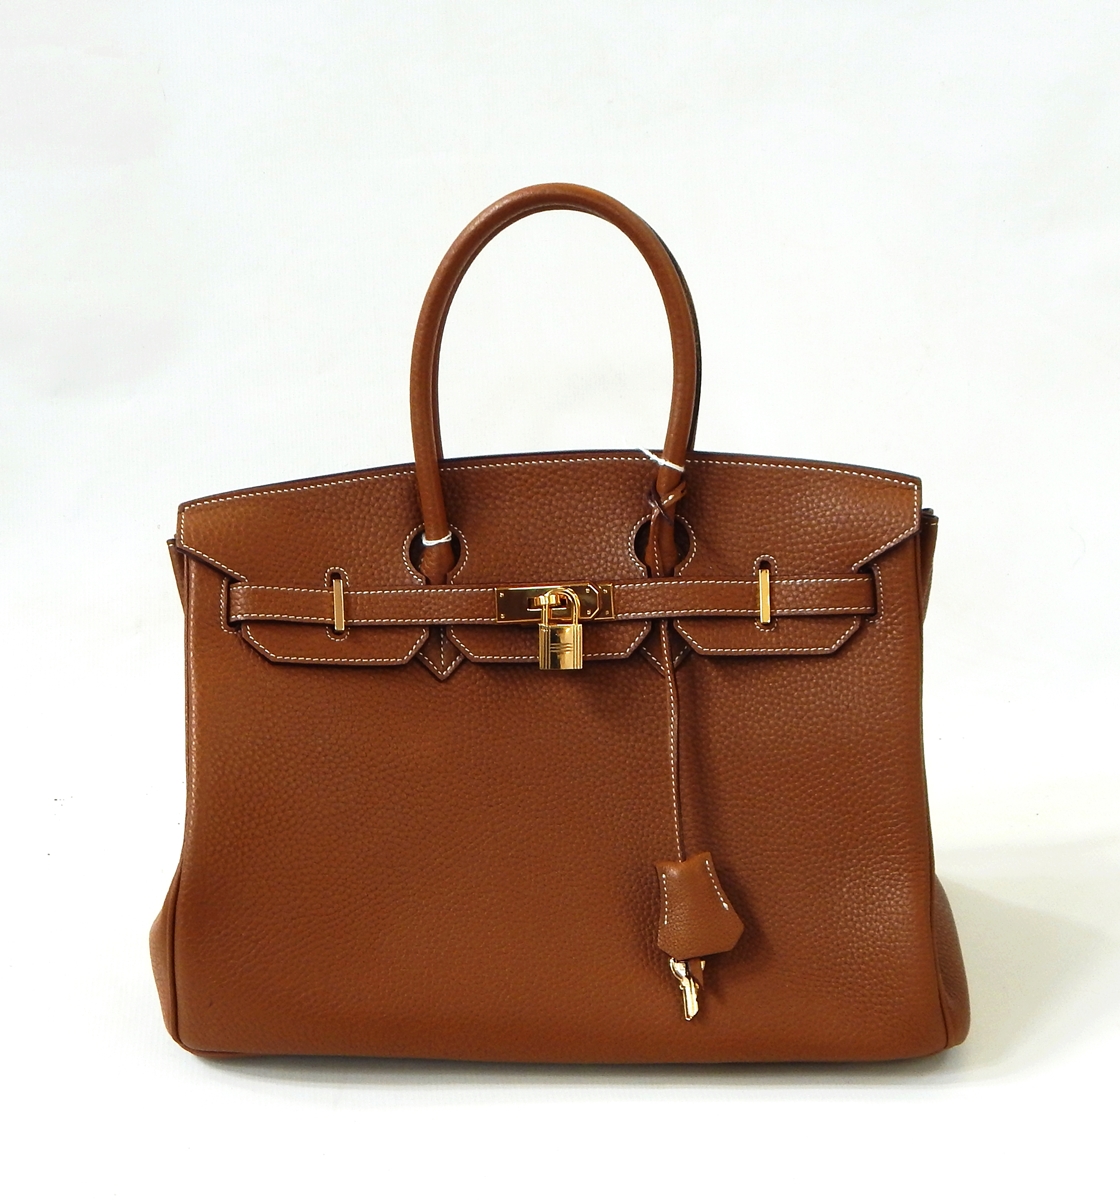 Hermes-style reproduction brown leather handbag with large box and a dust bag (3)